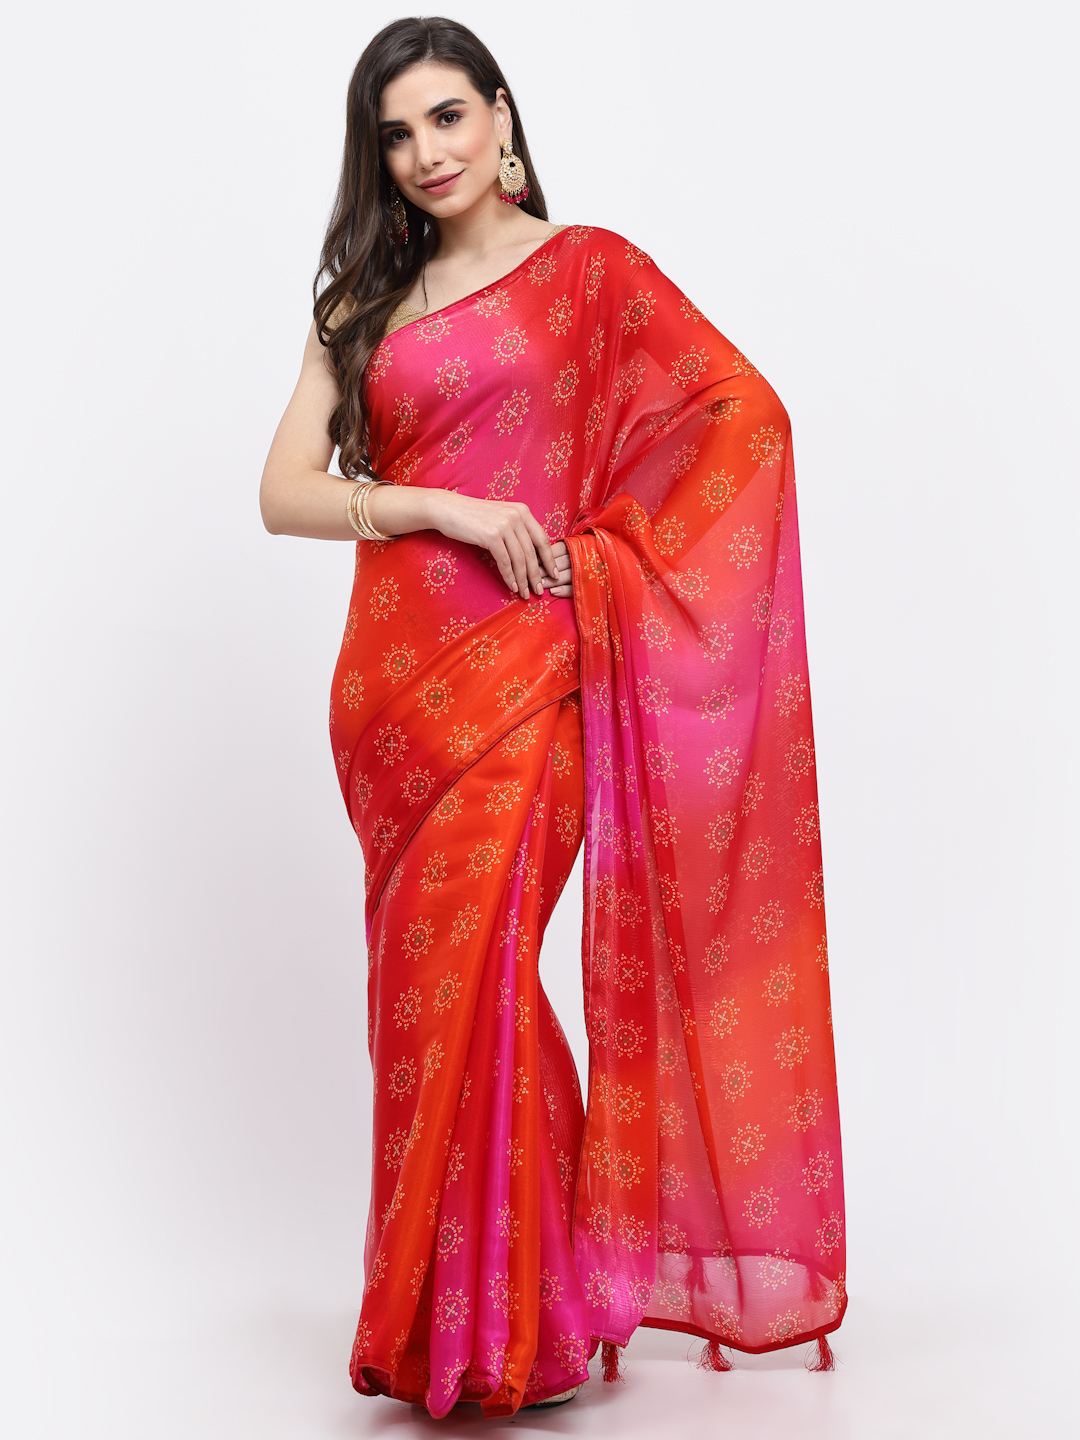 Women Geometric Print Silk Saree And Blouse Pink And Orange with Unstitched